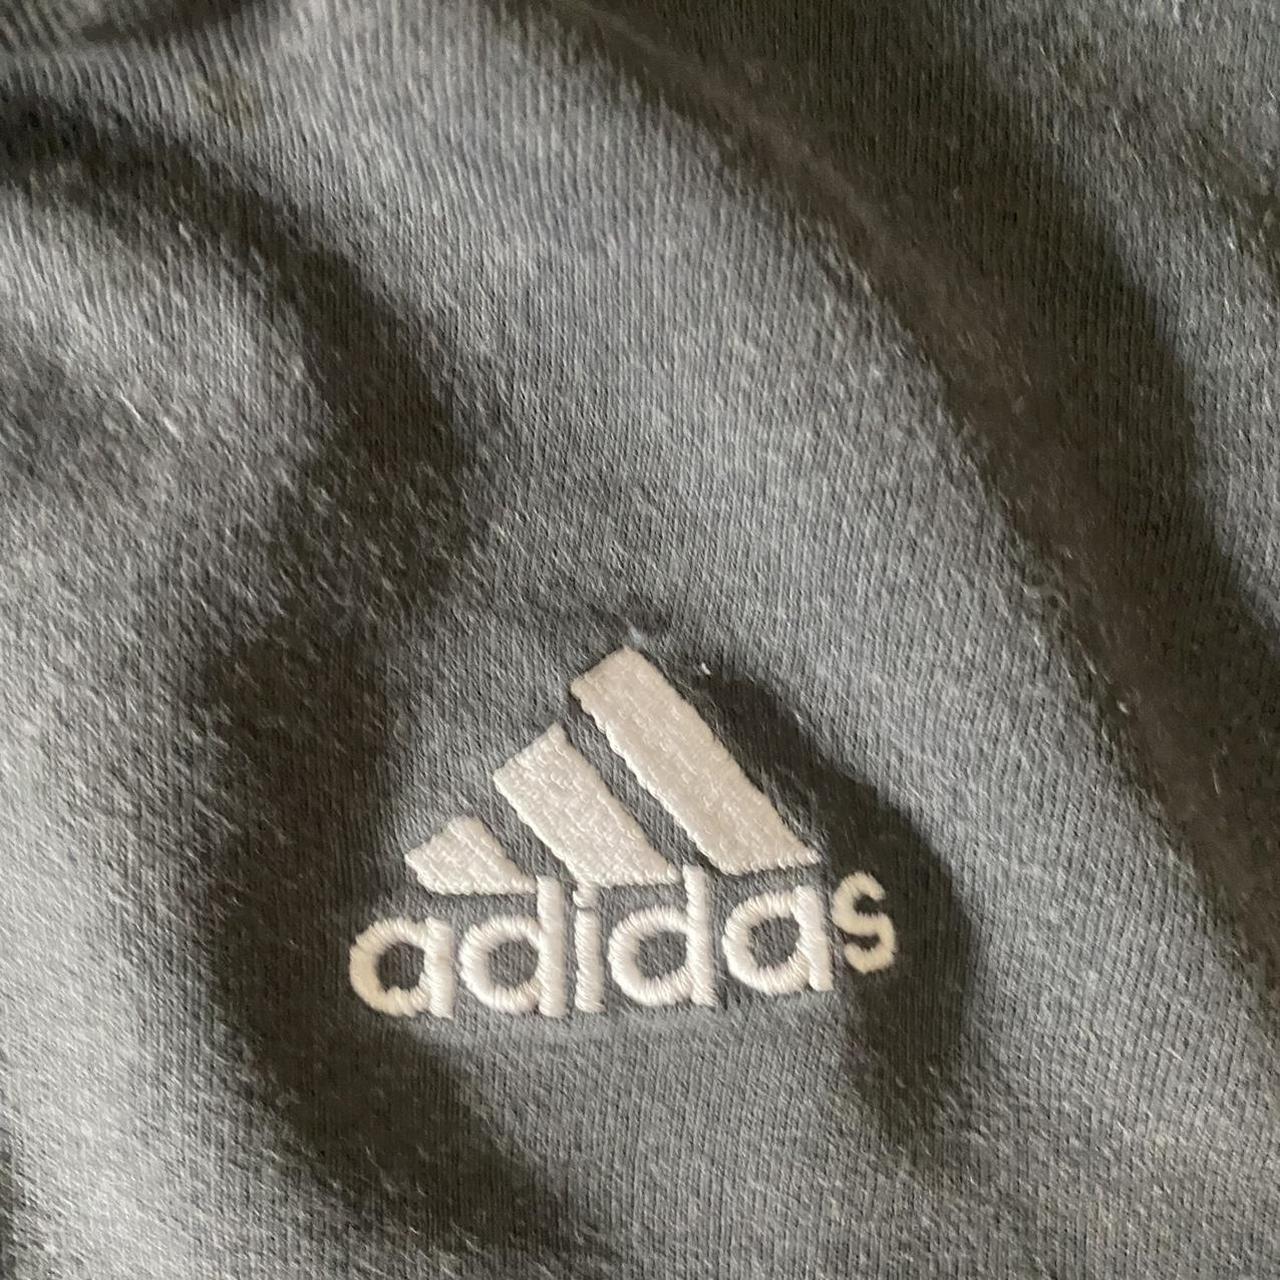 Product Image 3 - Vintage Adidas: LS
Size: XL
Condition: 10/10

This